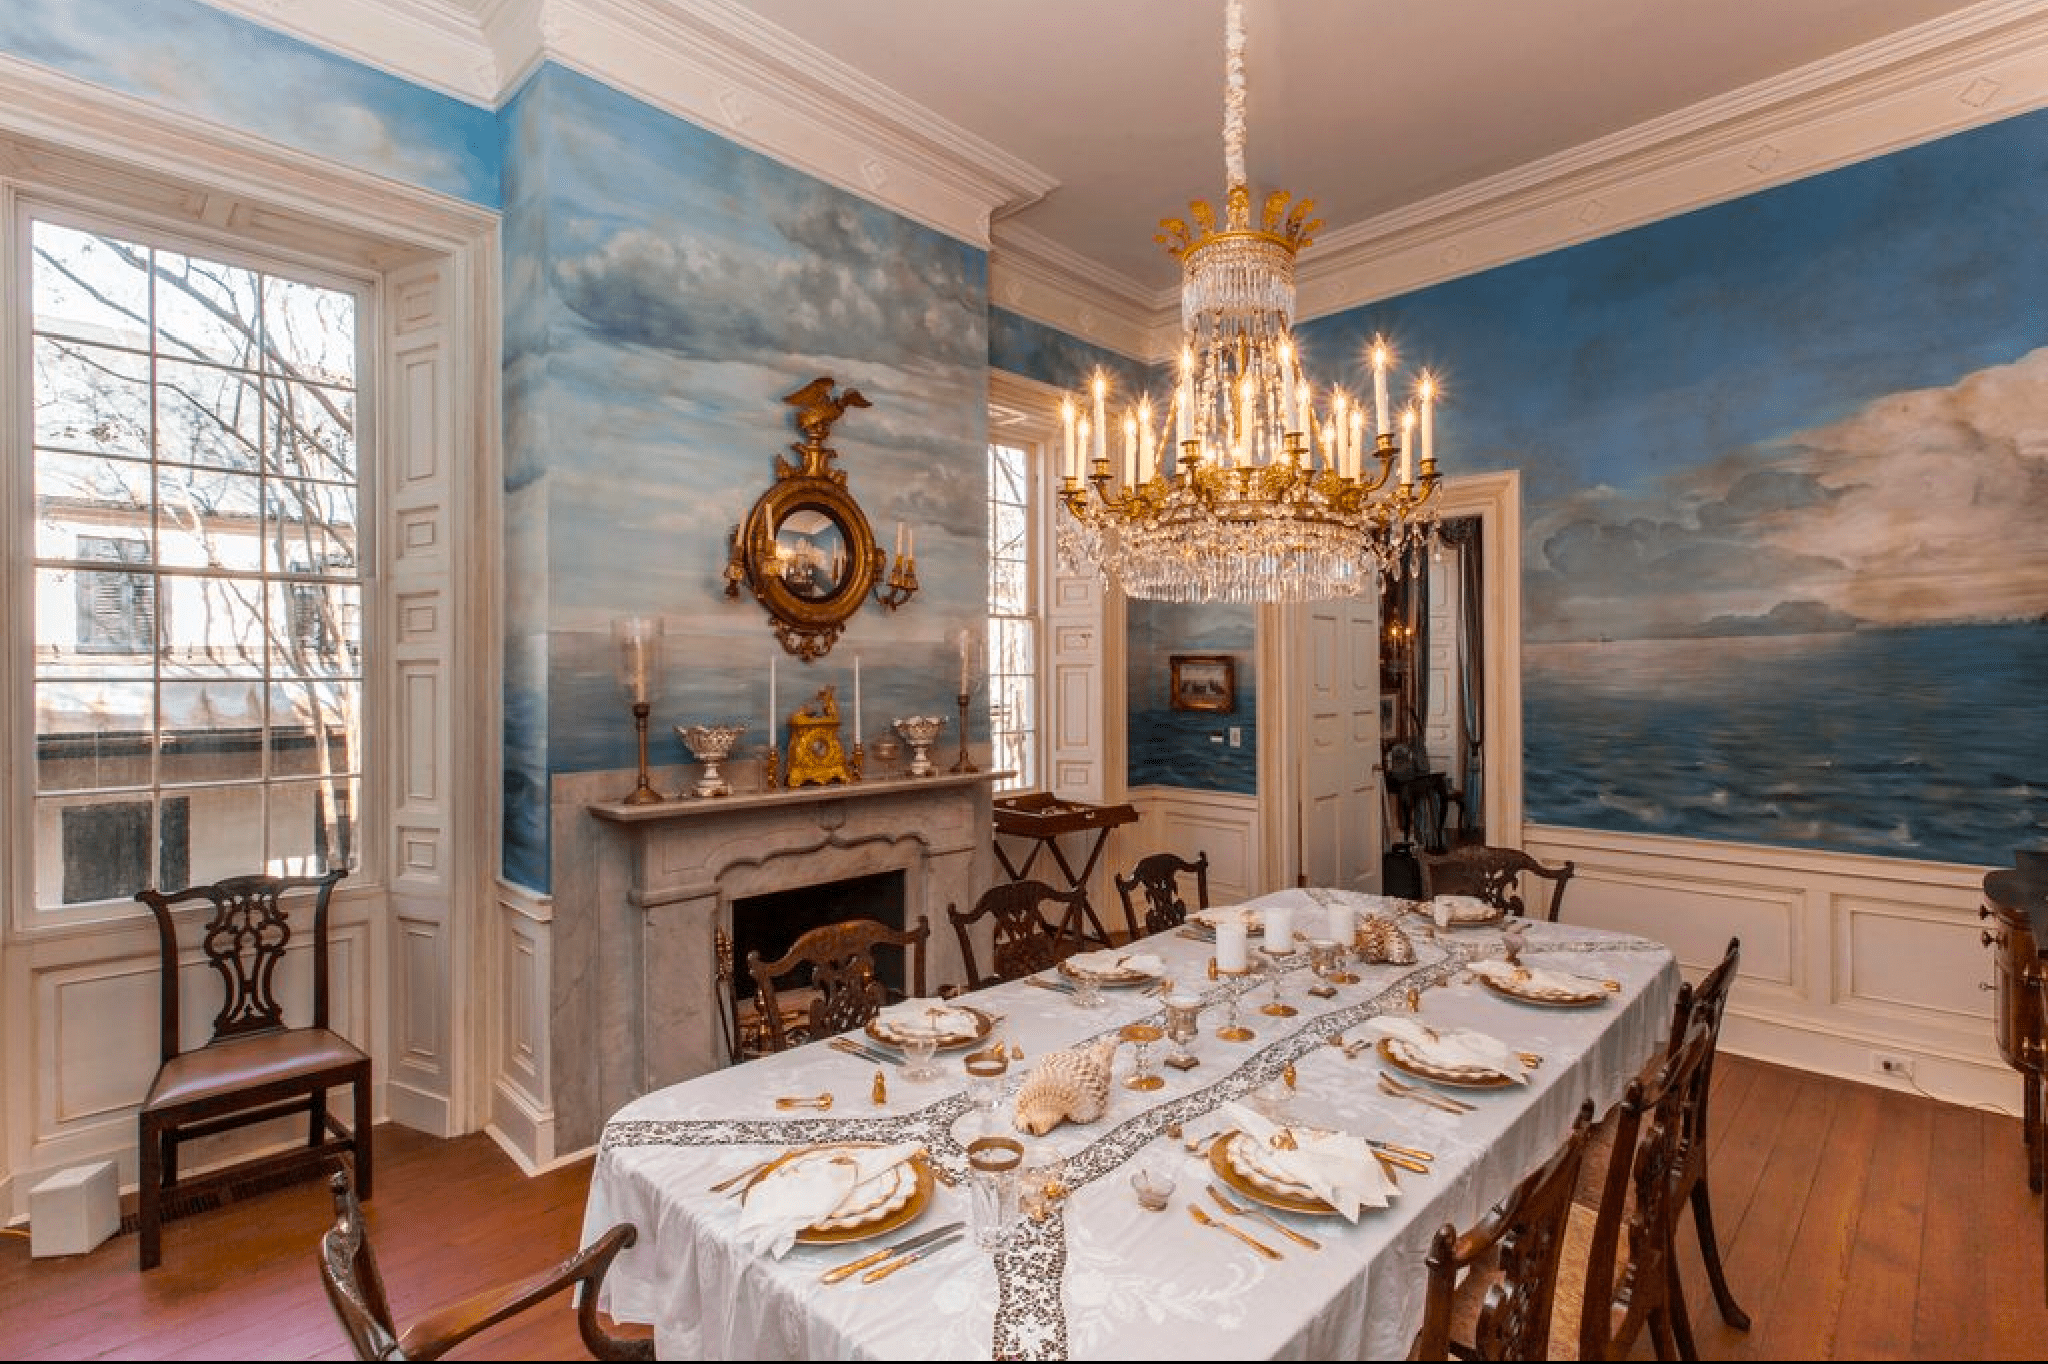 Southern dining room with hand painted mural